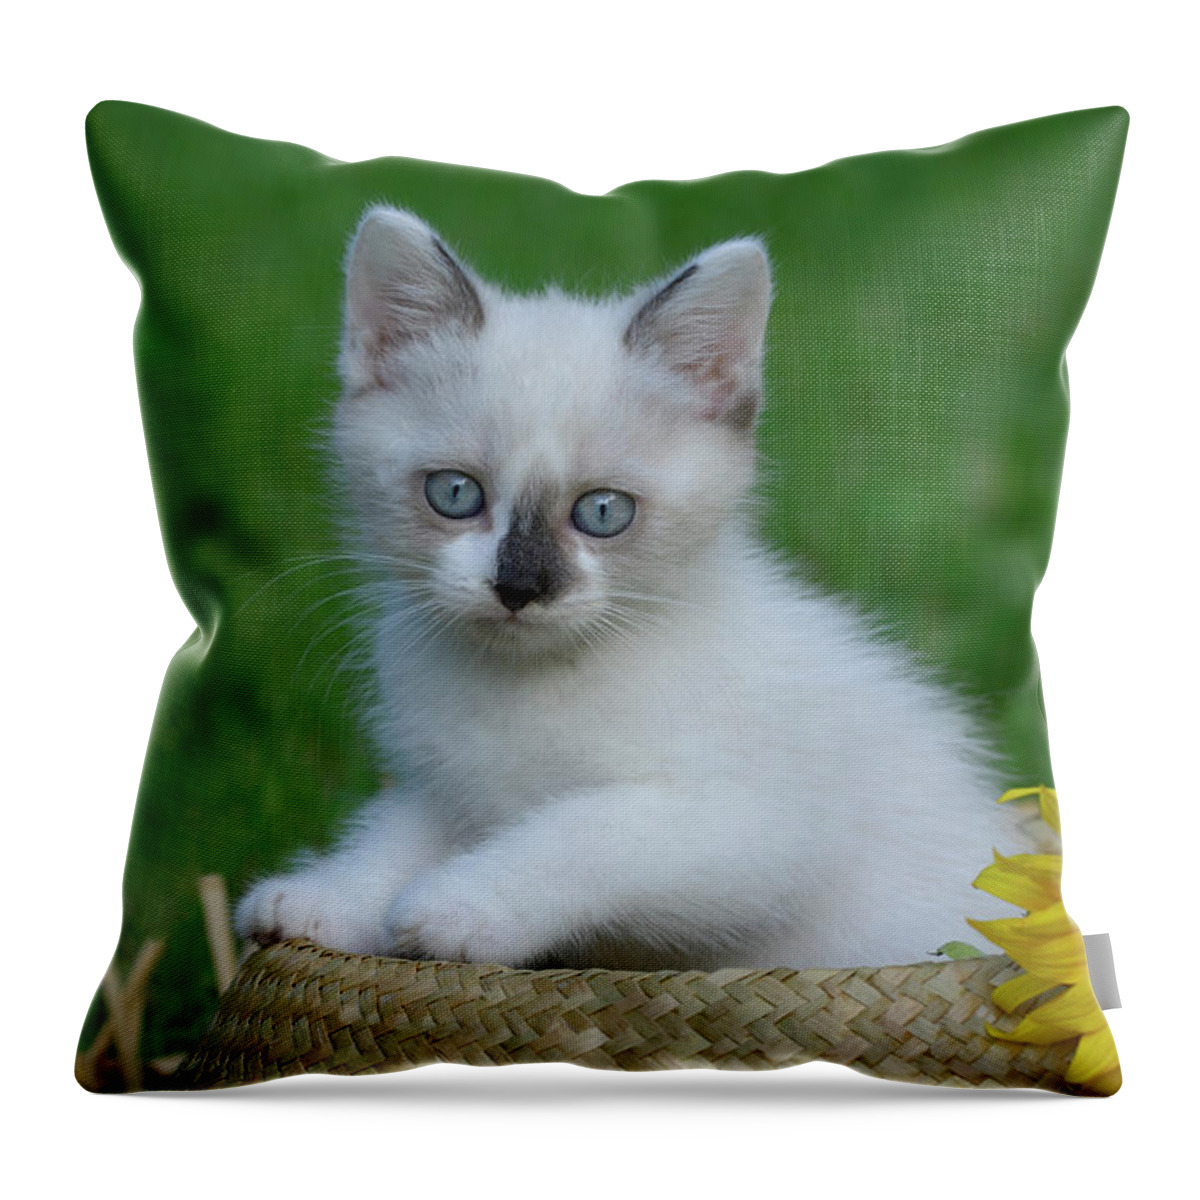 Pets Throw Pillow featuring the photograph Kitten Sitting In Straw Hat by Cornelia Doerr